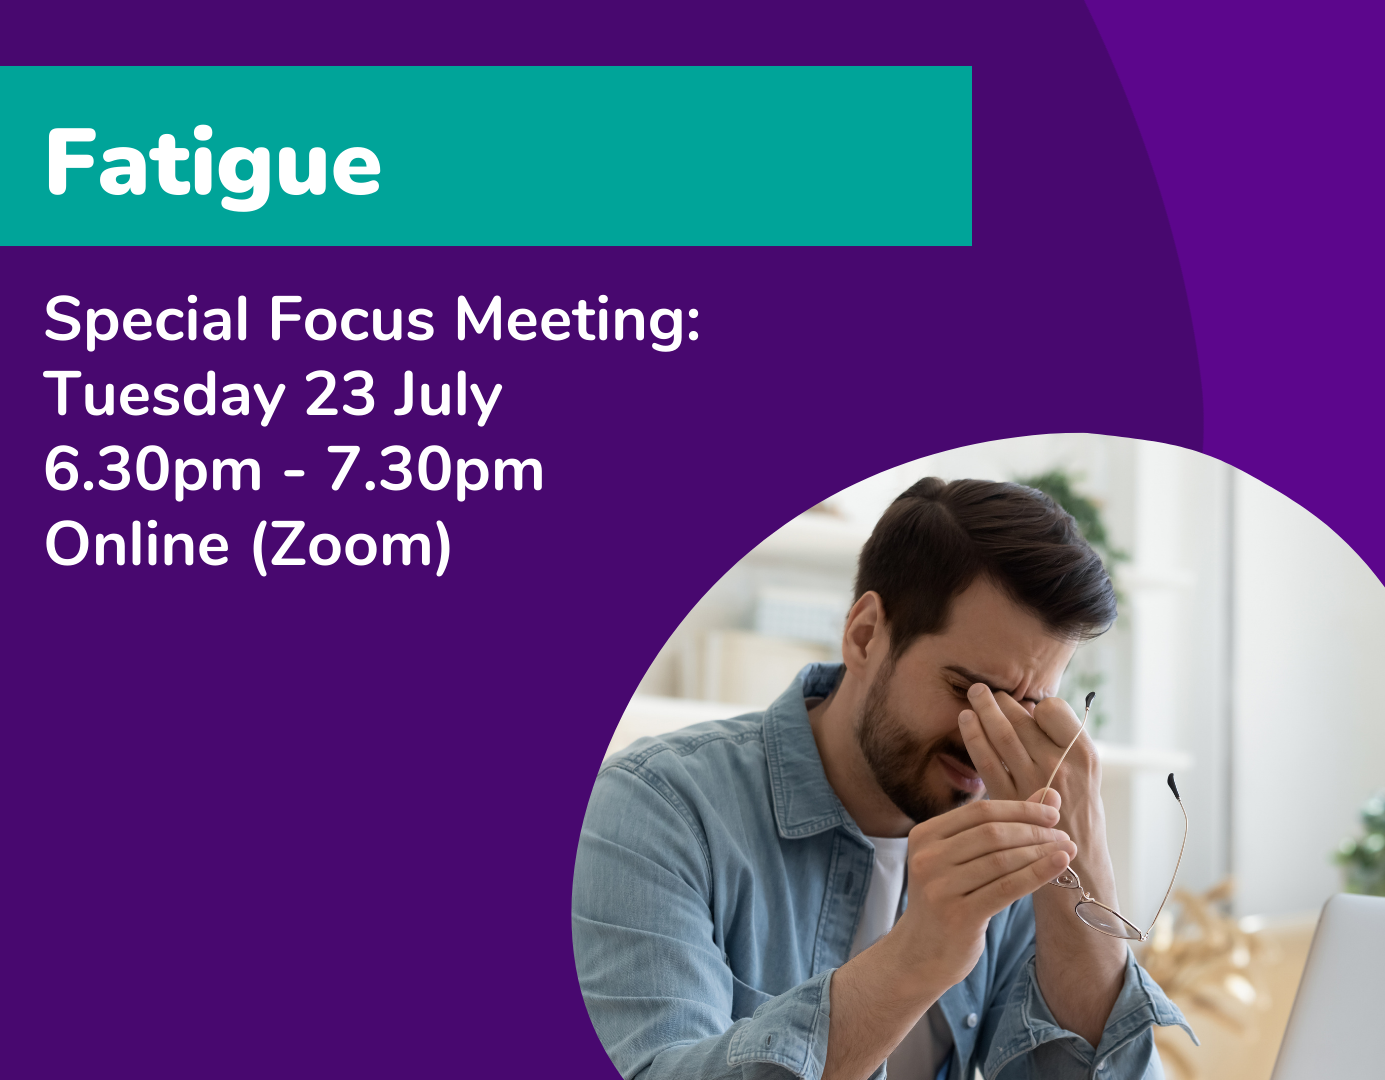 Fatigue Special Focus Meeting Tuesday 23 July 6.30pm - 7.30pm online (Zoom)